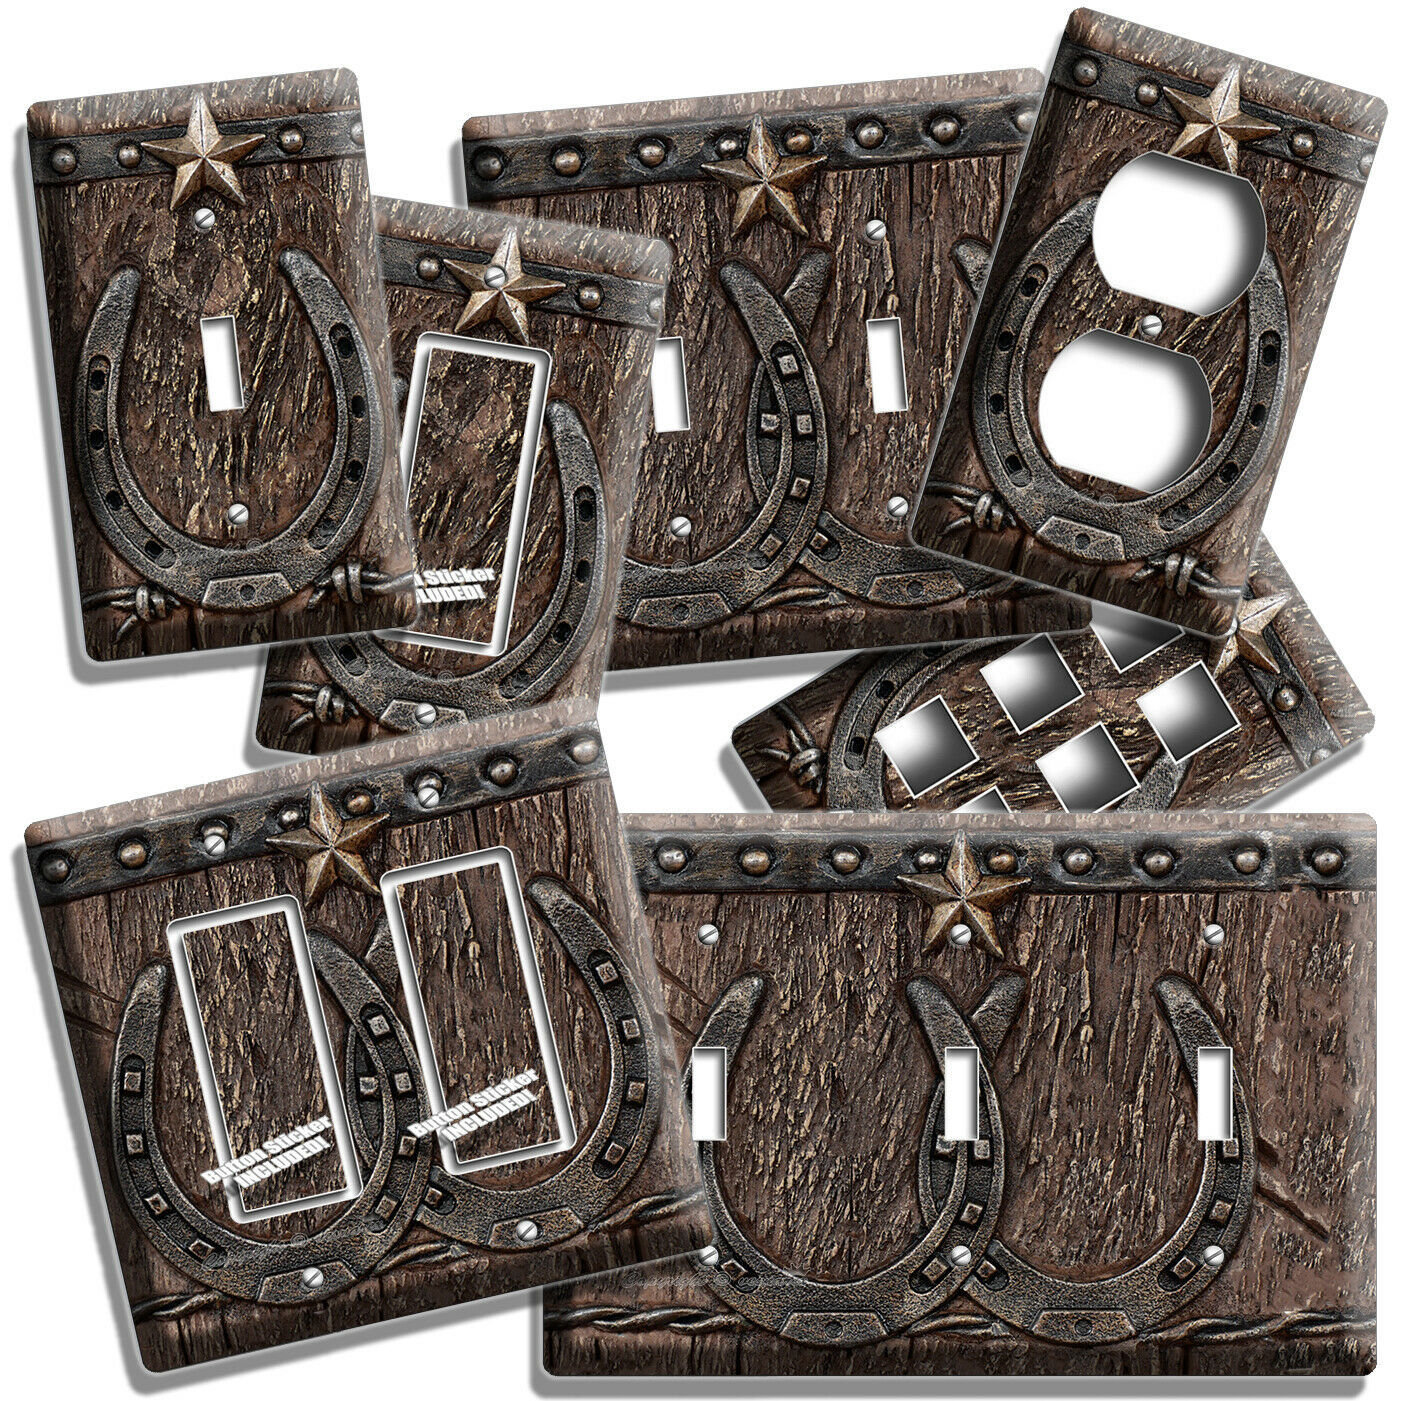 Primary image for RUSTIC WESTERN COWBOY LONE STAR LUCKY HORSESHOE LIGHT SWITCH OUTLET WALL DECOR